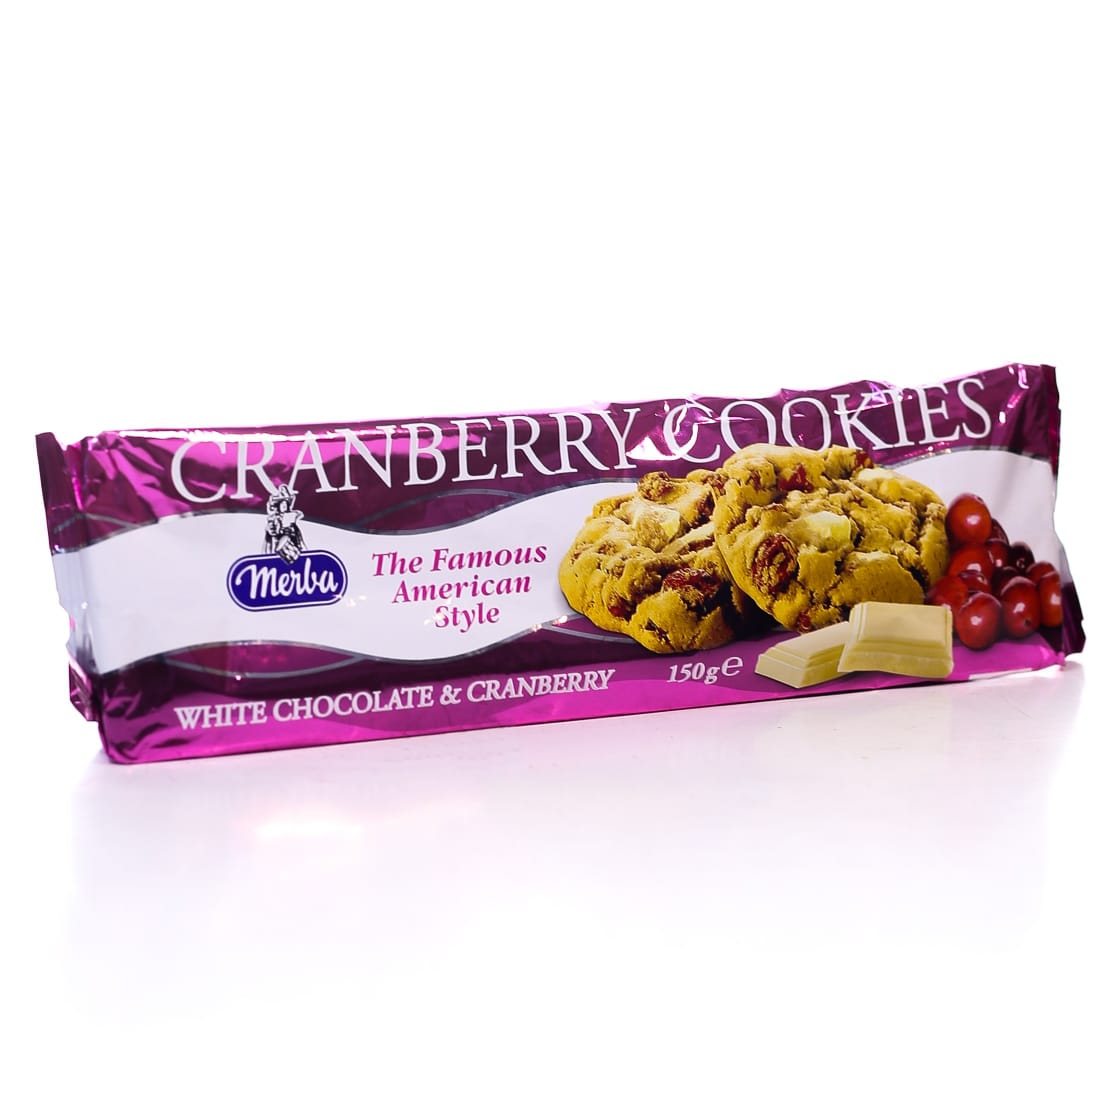 MERBA COOKIES CRANBERRY AND WHITE CHCOLATE 150 GM